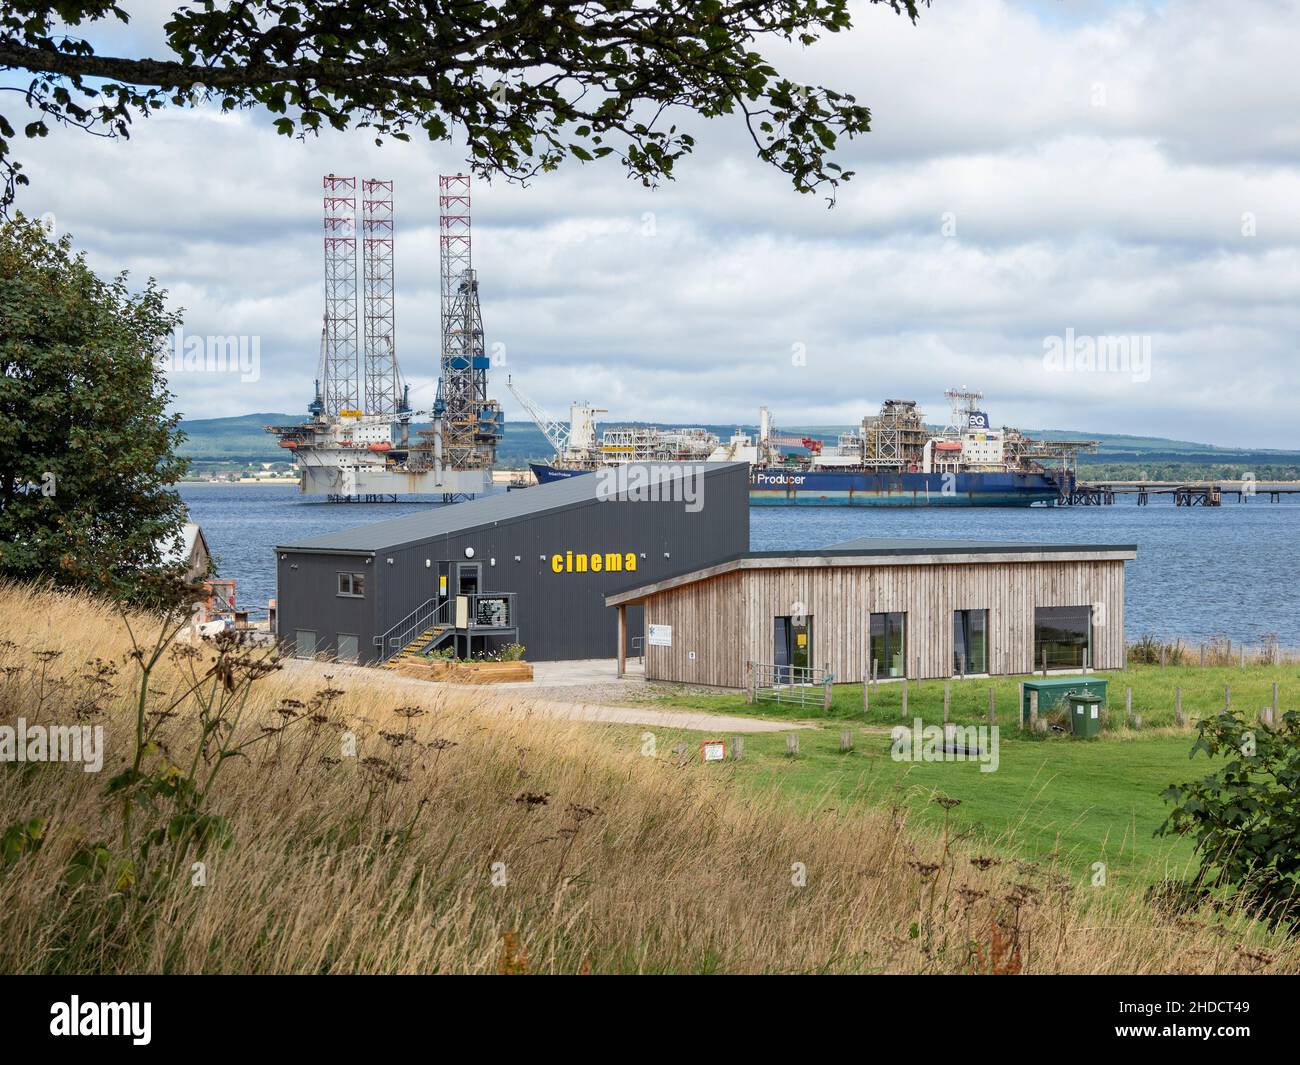 The Cinema and Cromarty Links Hub buildings with oil platform and ship behind. Cromarty, Black Isle, Highland, Scotland Stock Photo